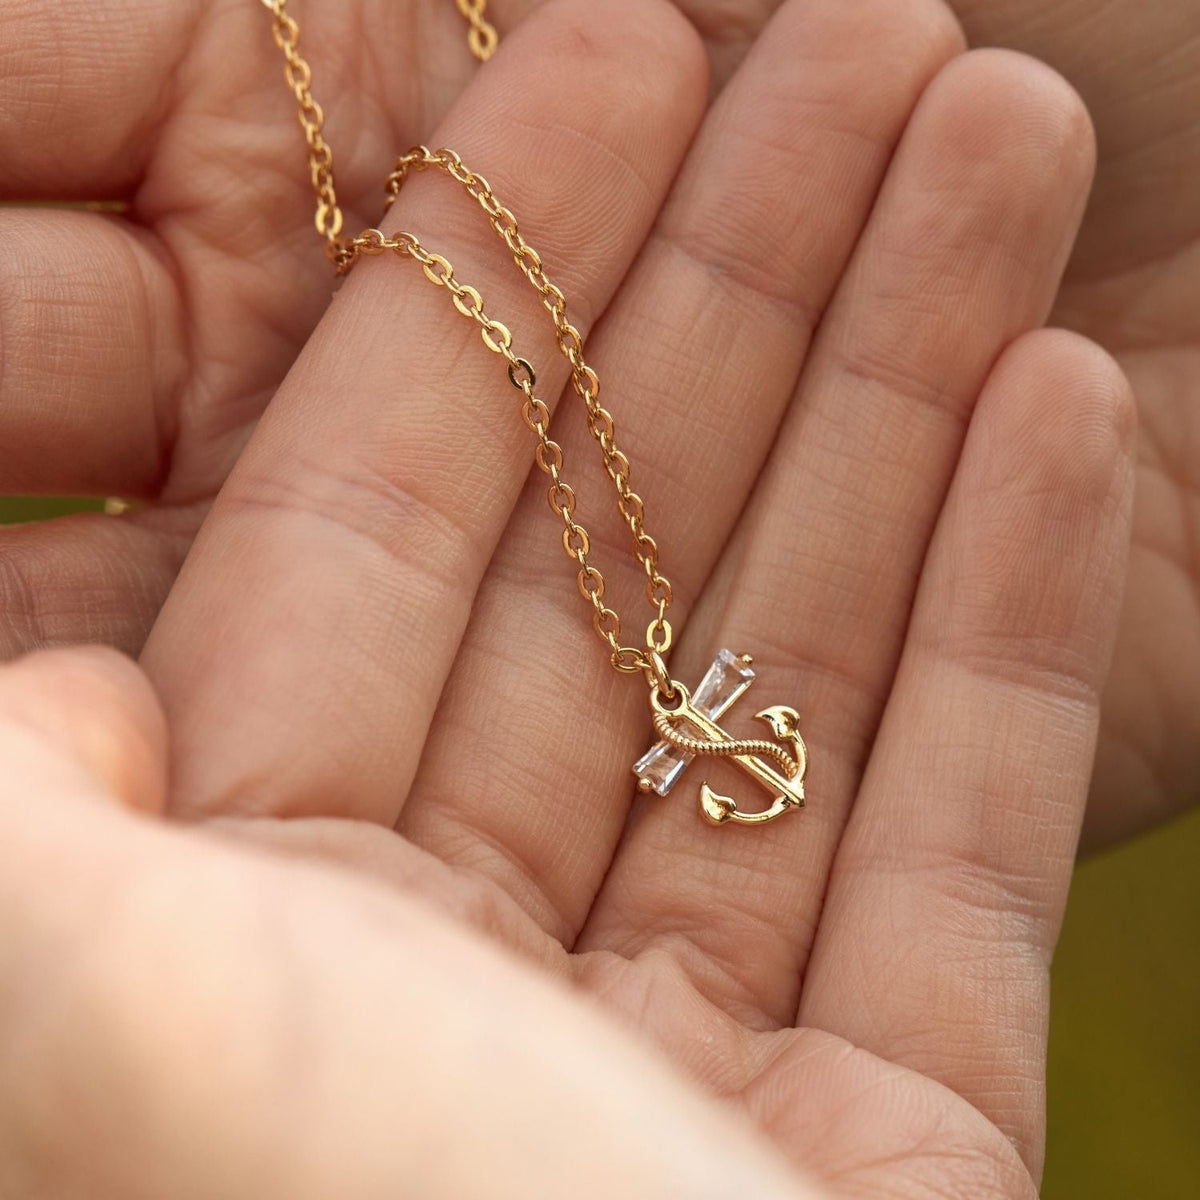 Buy Ship Anchor Pendant Necklace Dainty Anchor Necklace Handmade Jewelry  Jewelry Personalized Gifts Gift for Her Gifts Online in India - Etsy